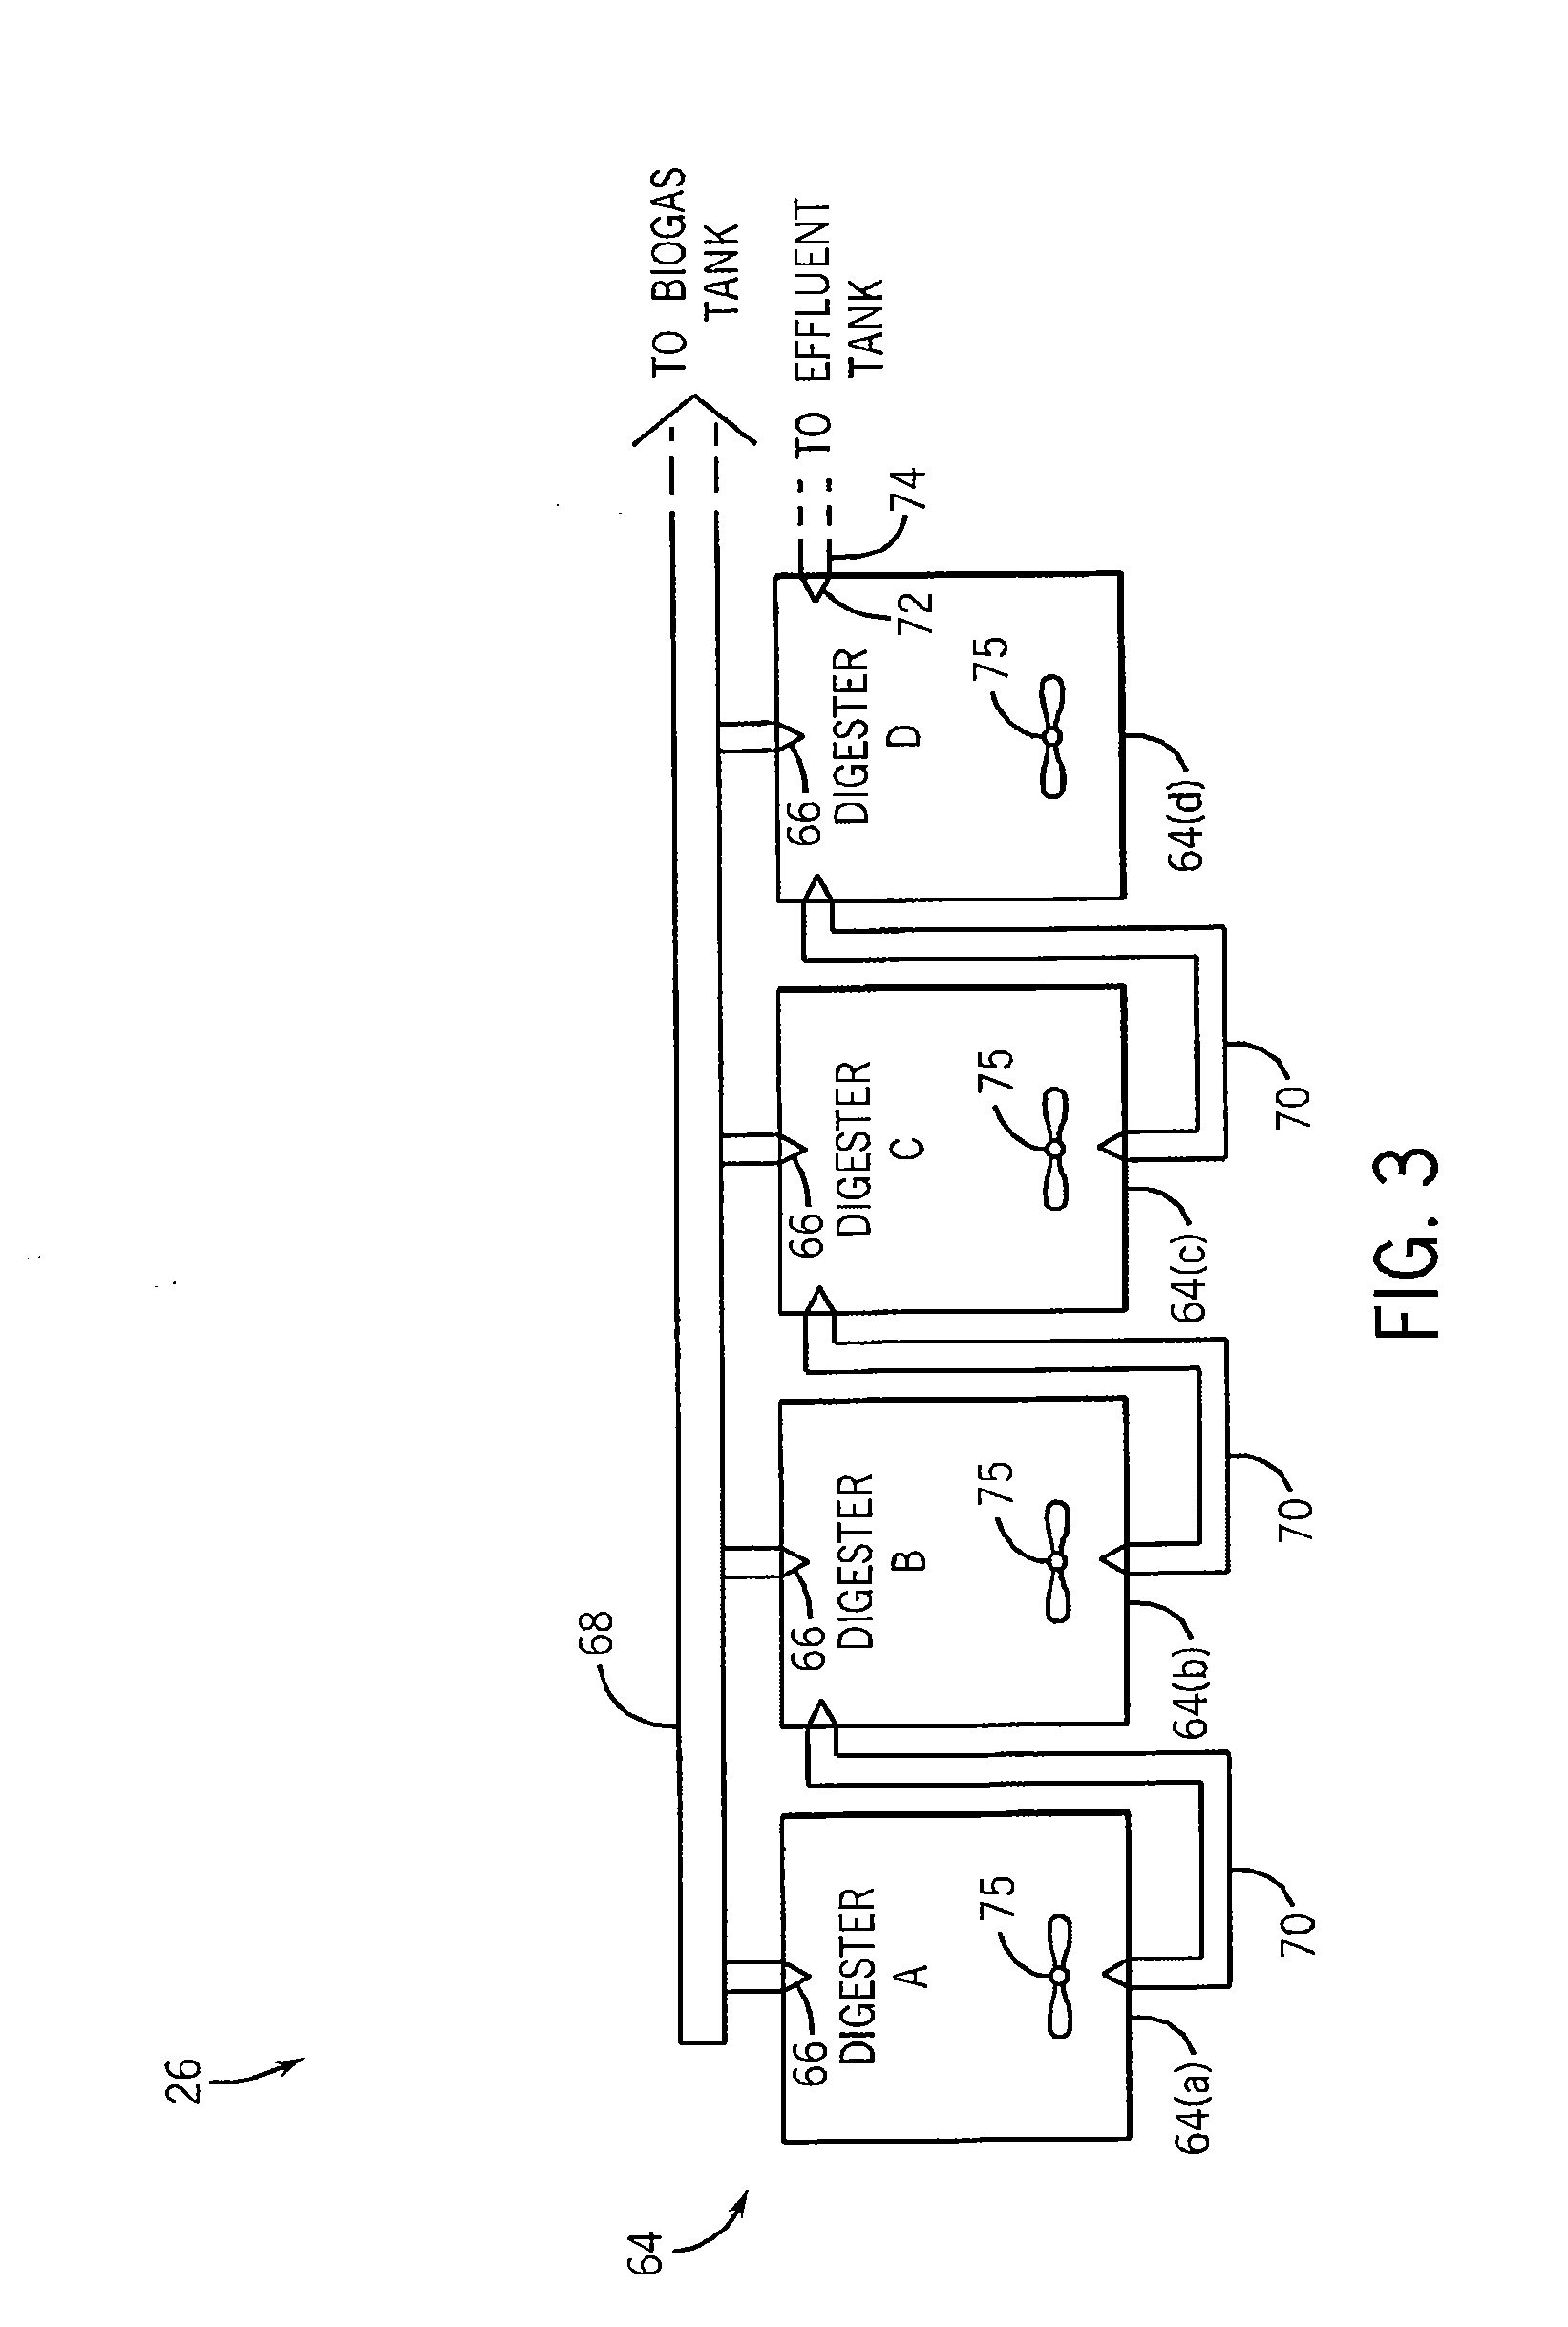 Organic Substrate Treatment System